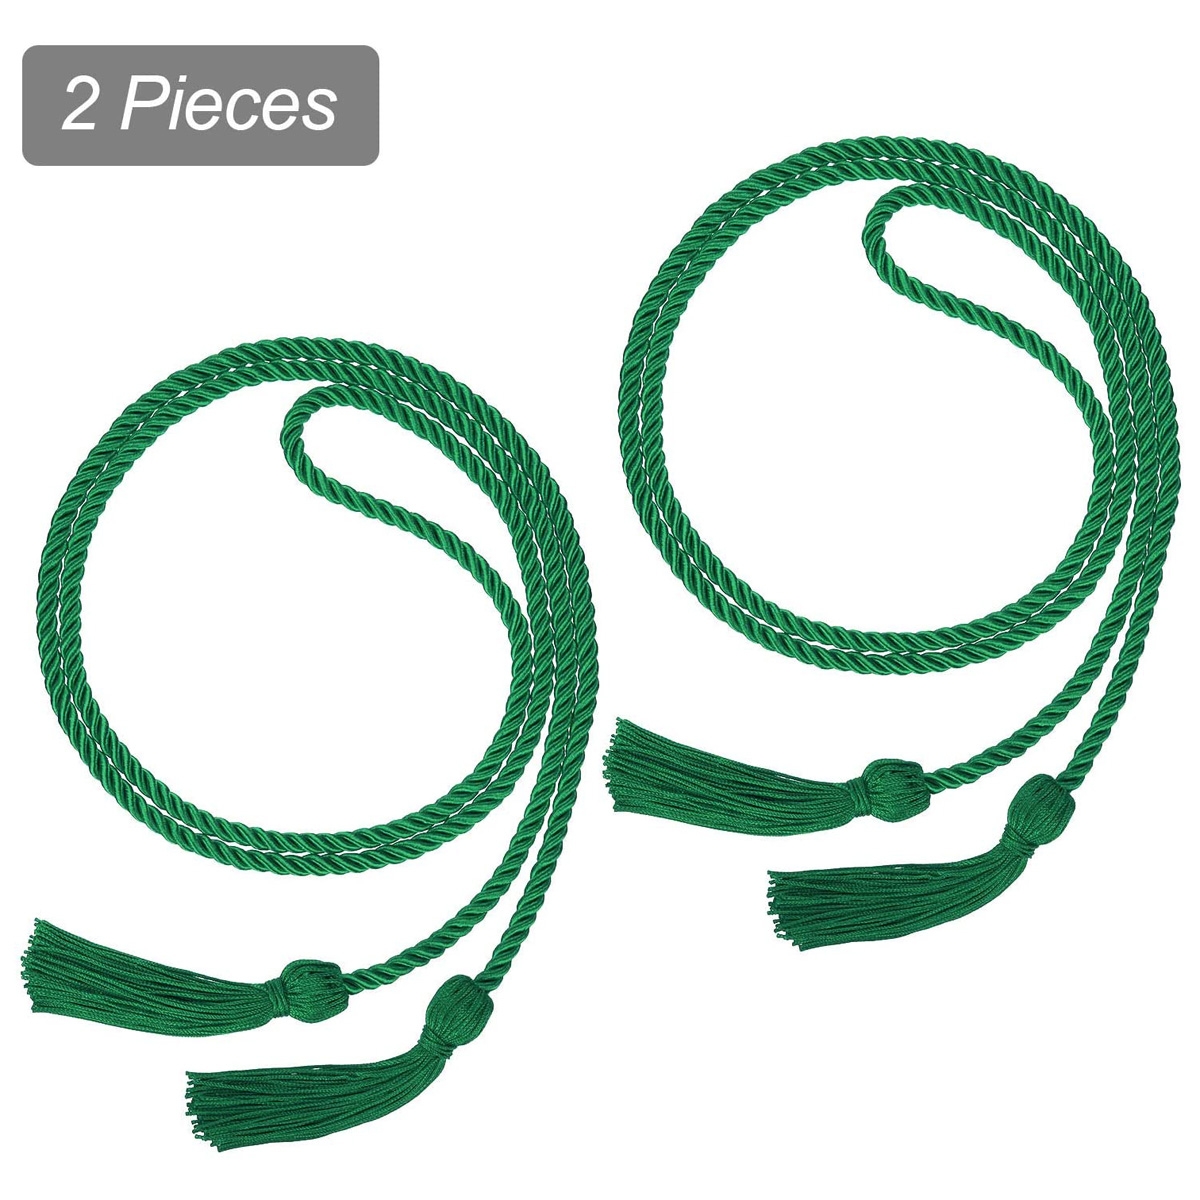 2 Pieces Graduation Cords Polyester Yarn Honor Cord with Tassel for Graduation Students (Green)